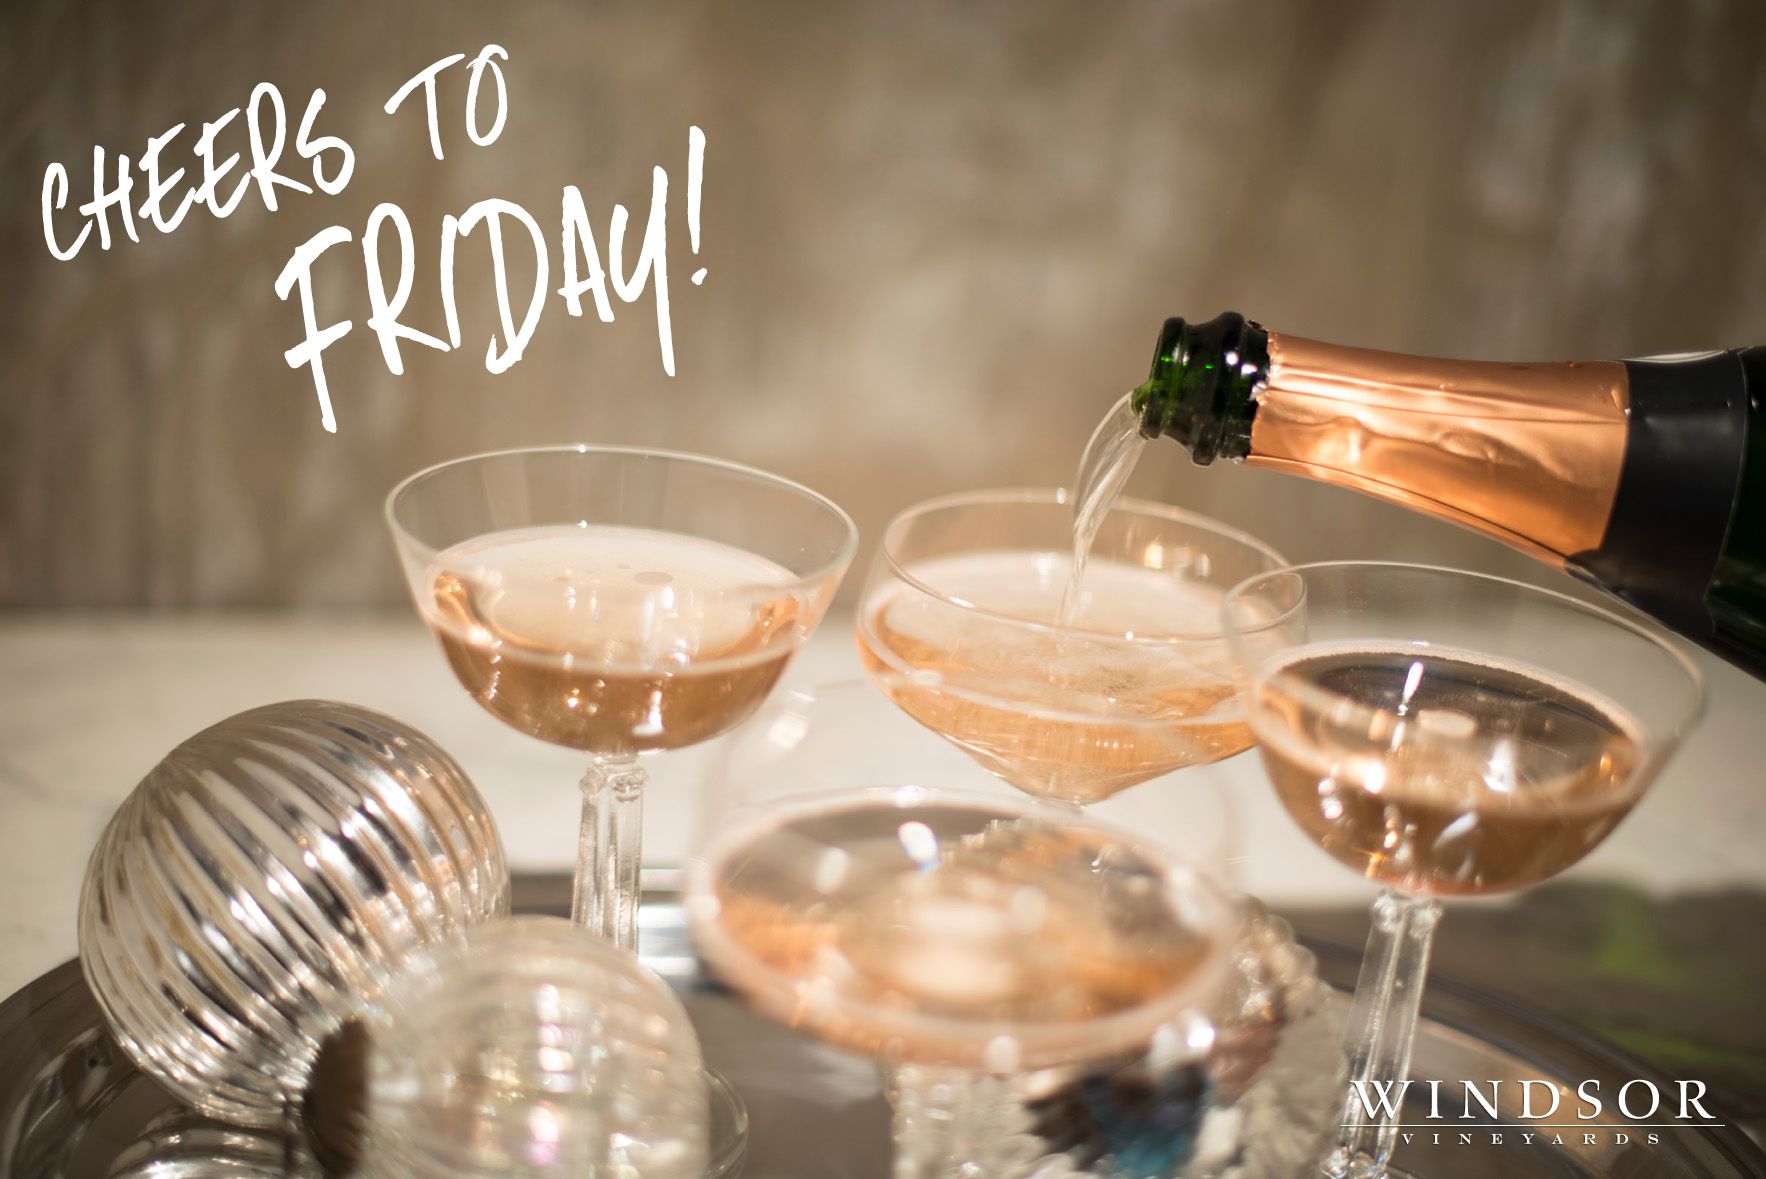 Have a great weekend! Cheers! #WVwines